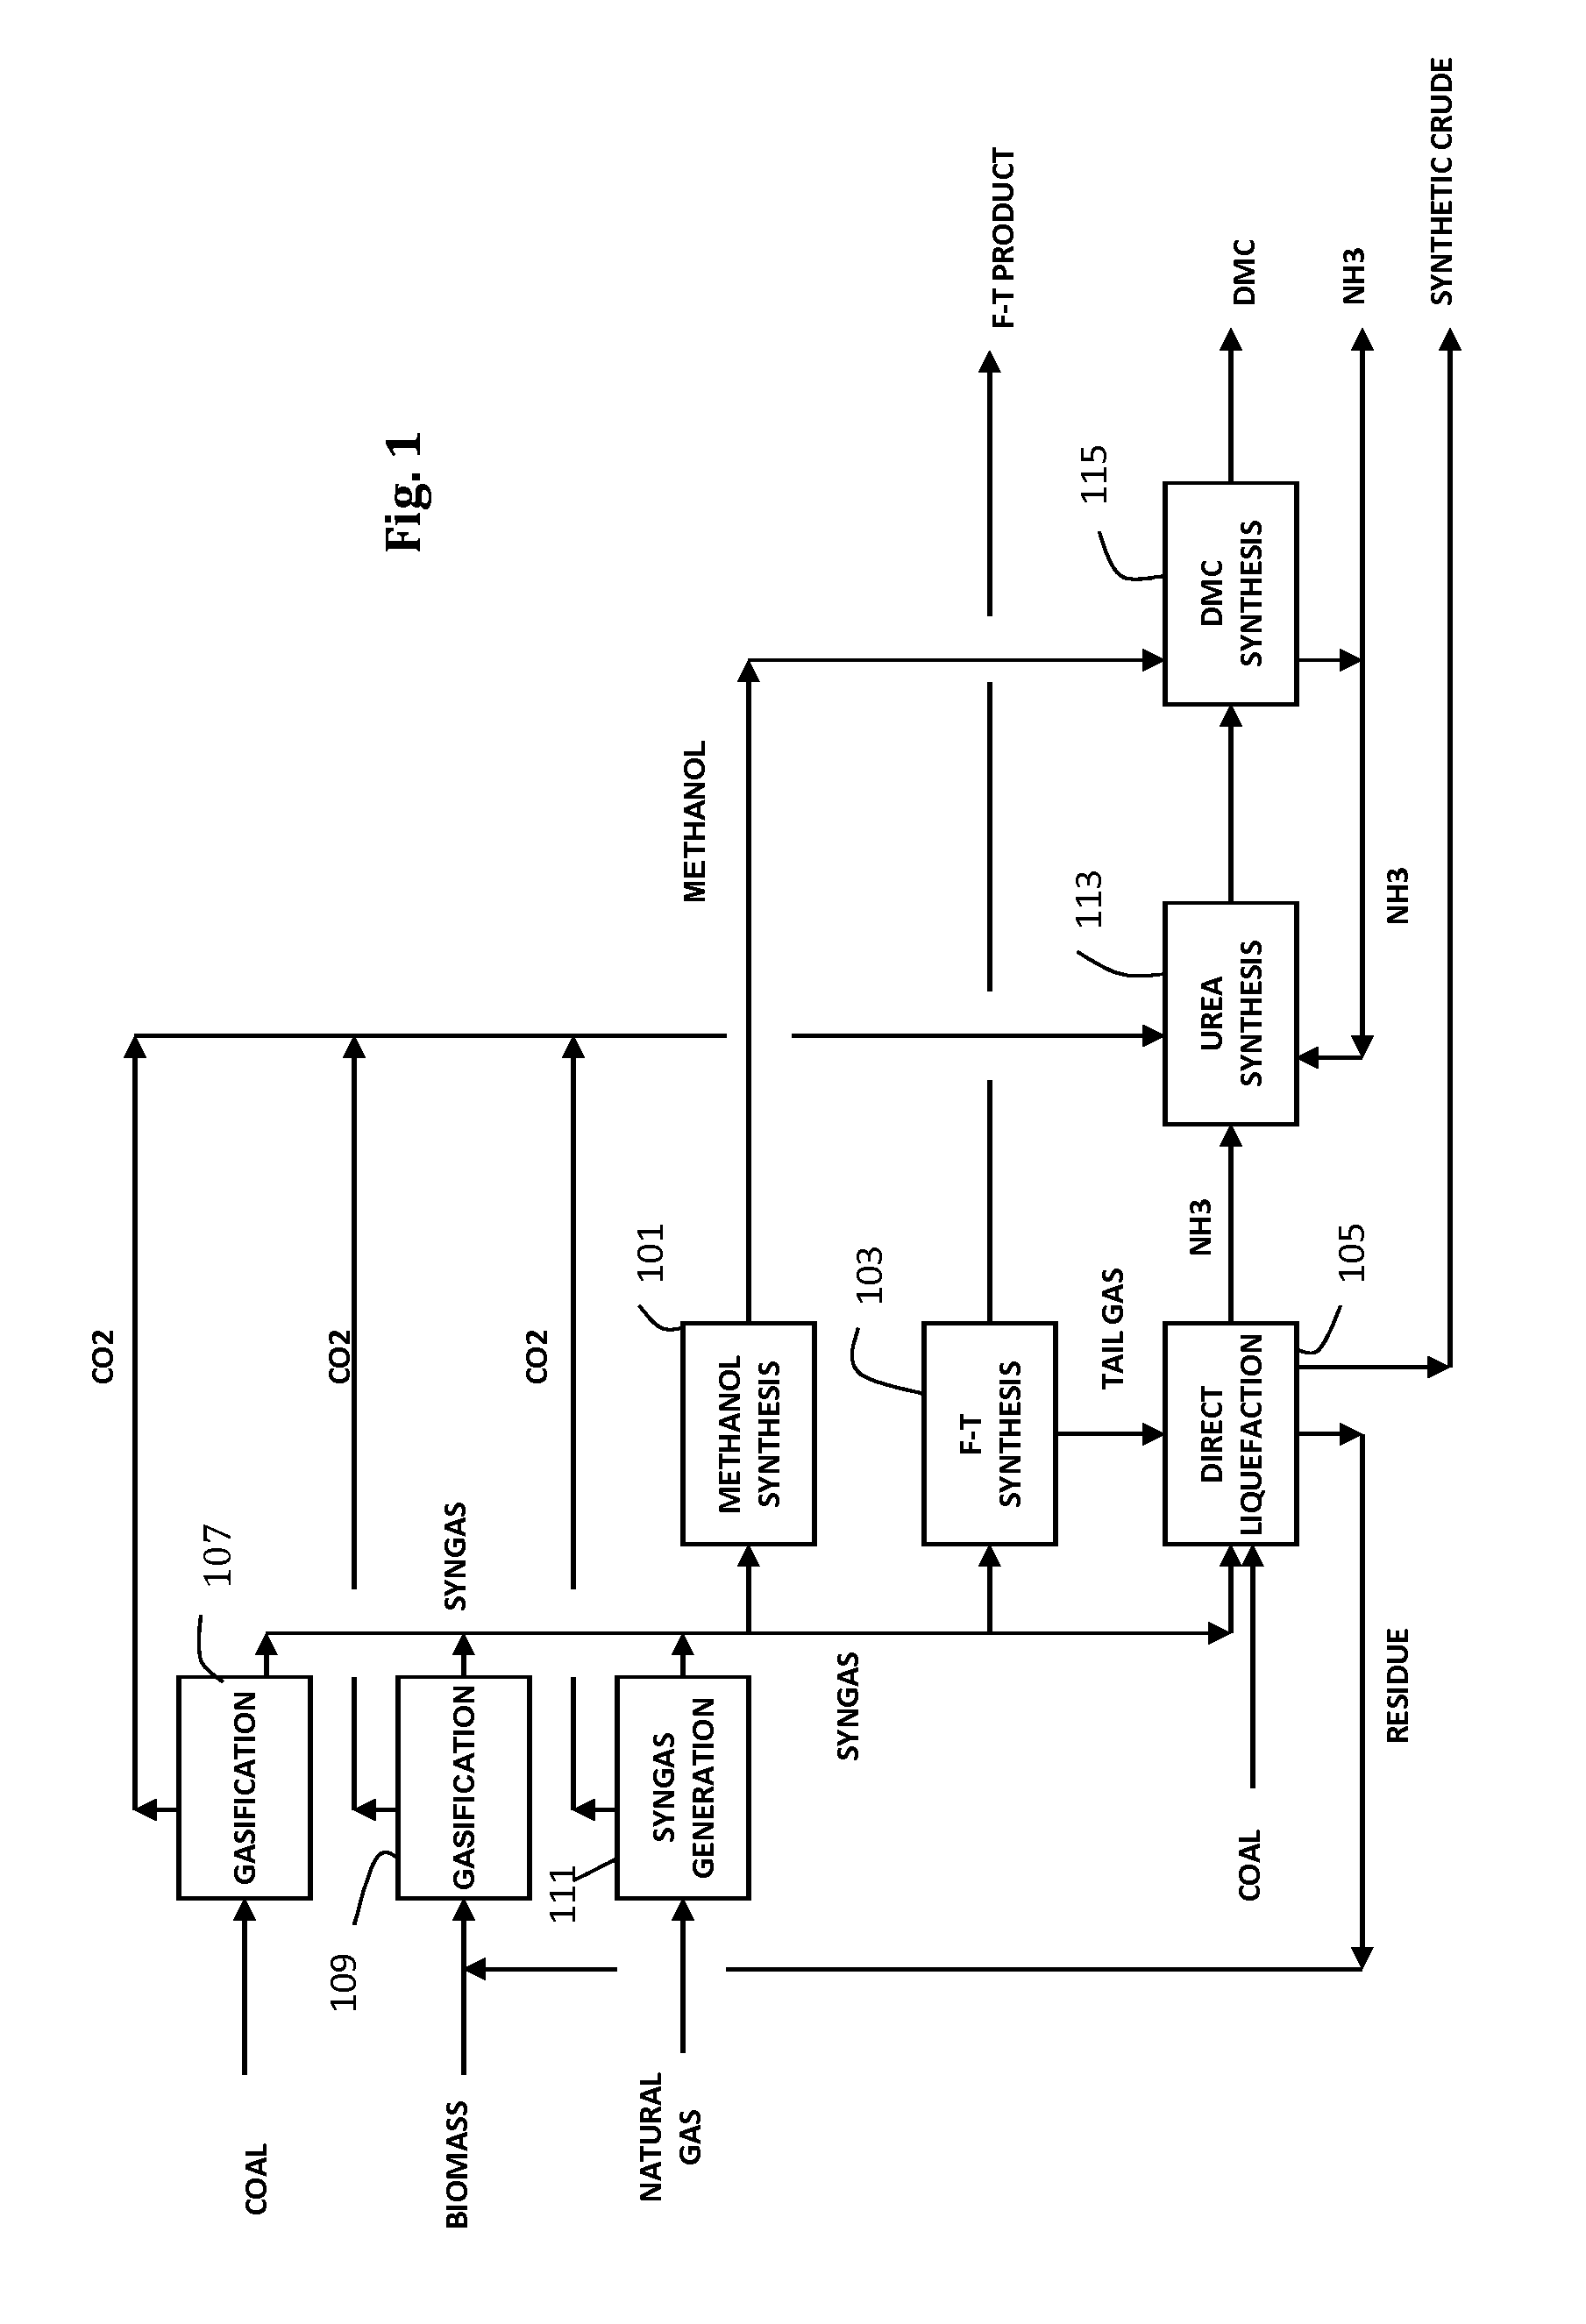 Integrated coal to liquids process and system